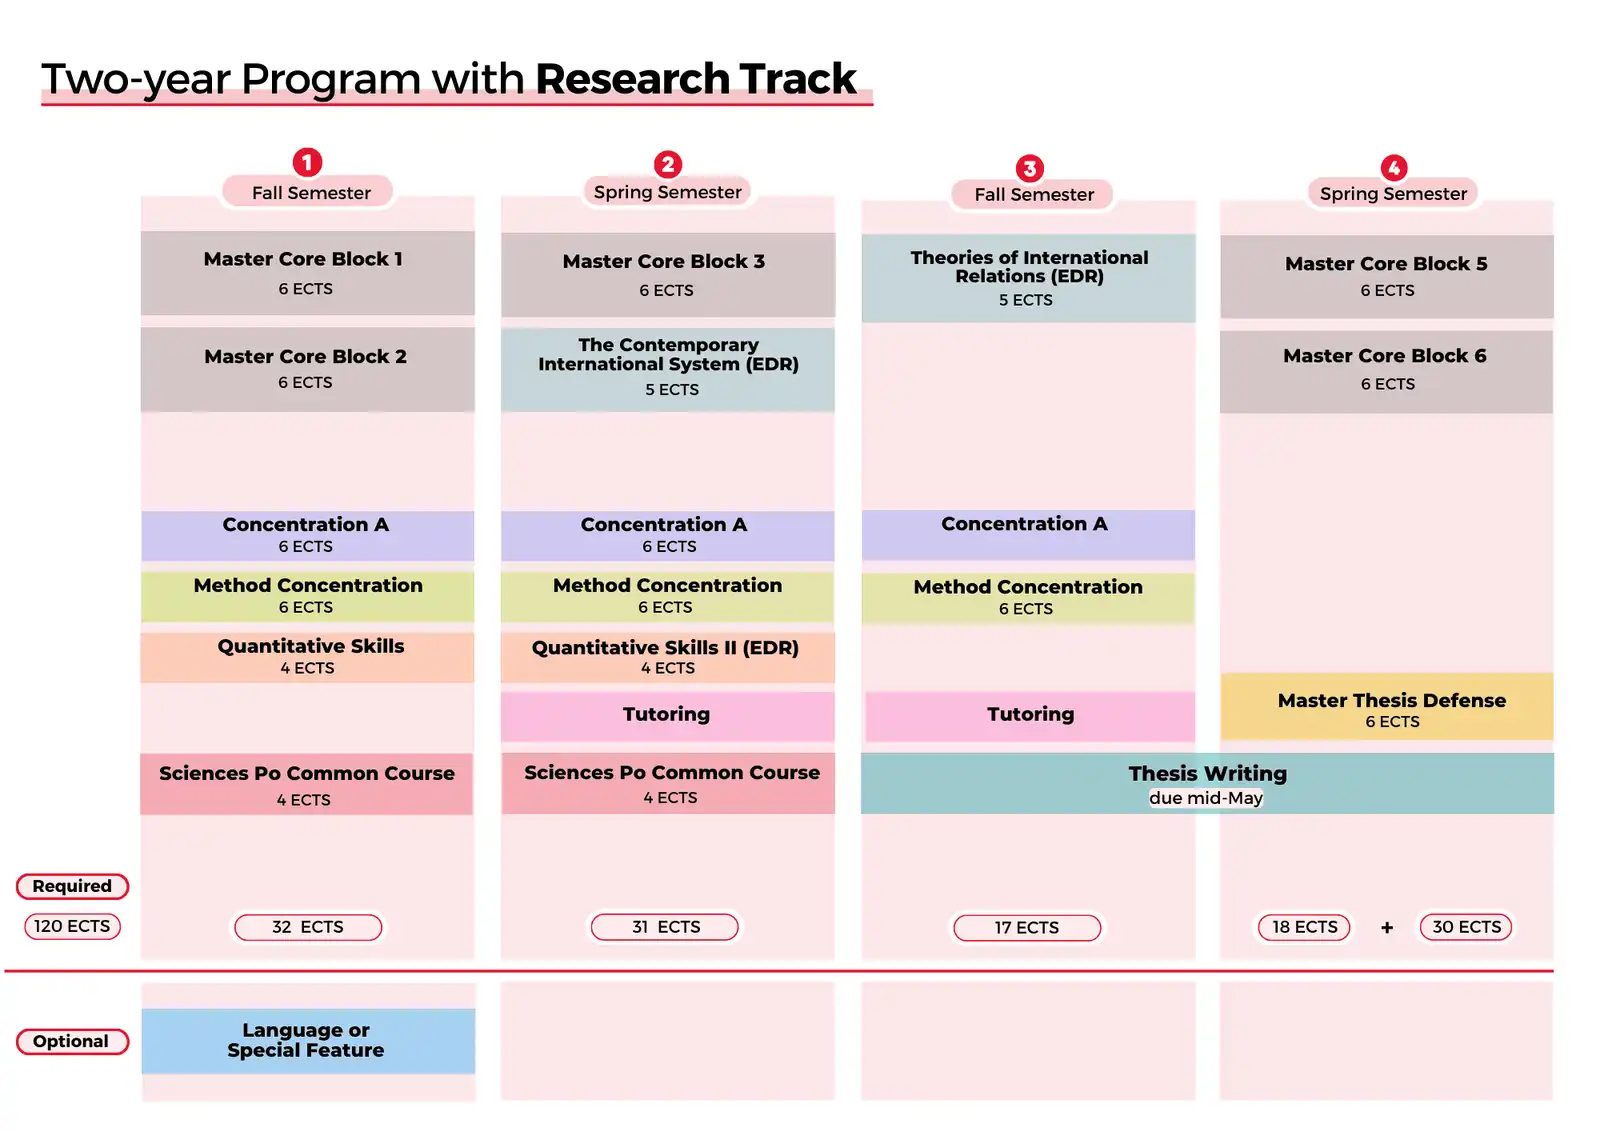 Programme structure of the PSIA research track